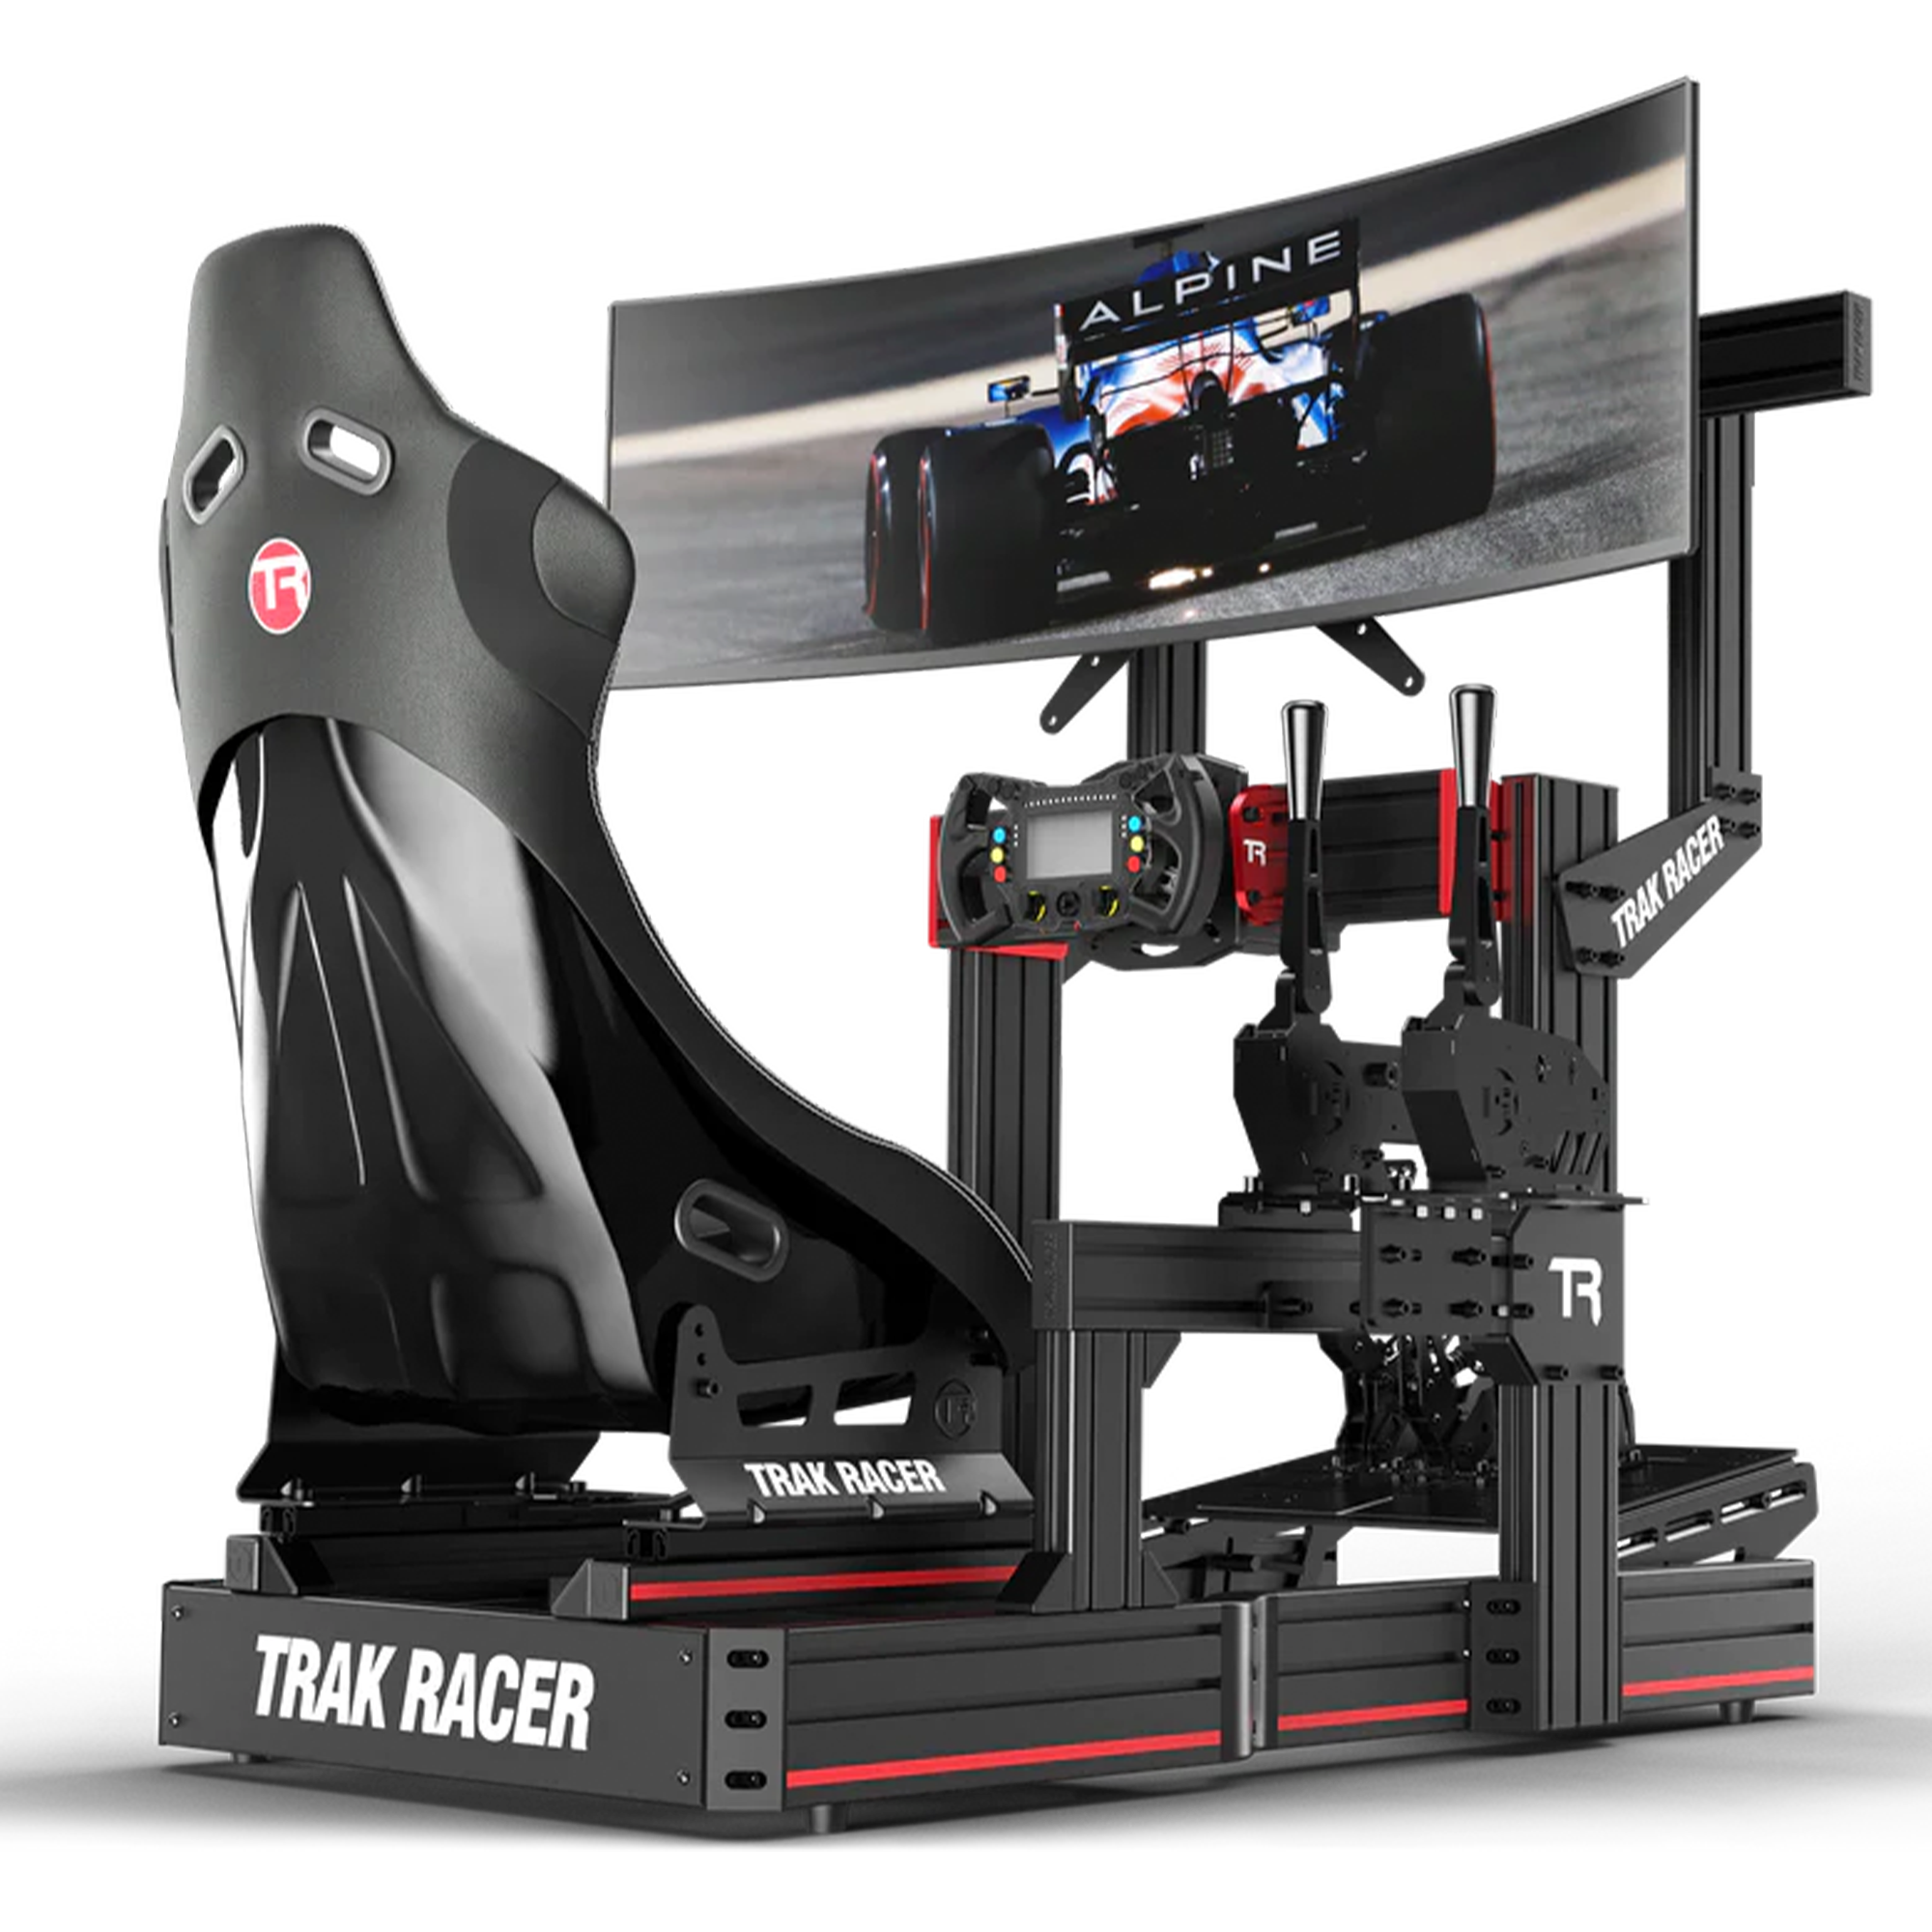 Monitor or TV holder up to 45" for Trak Racer 800 mm cockpits